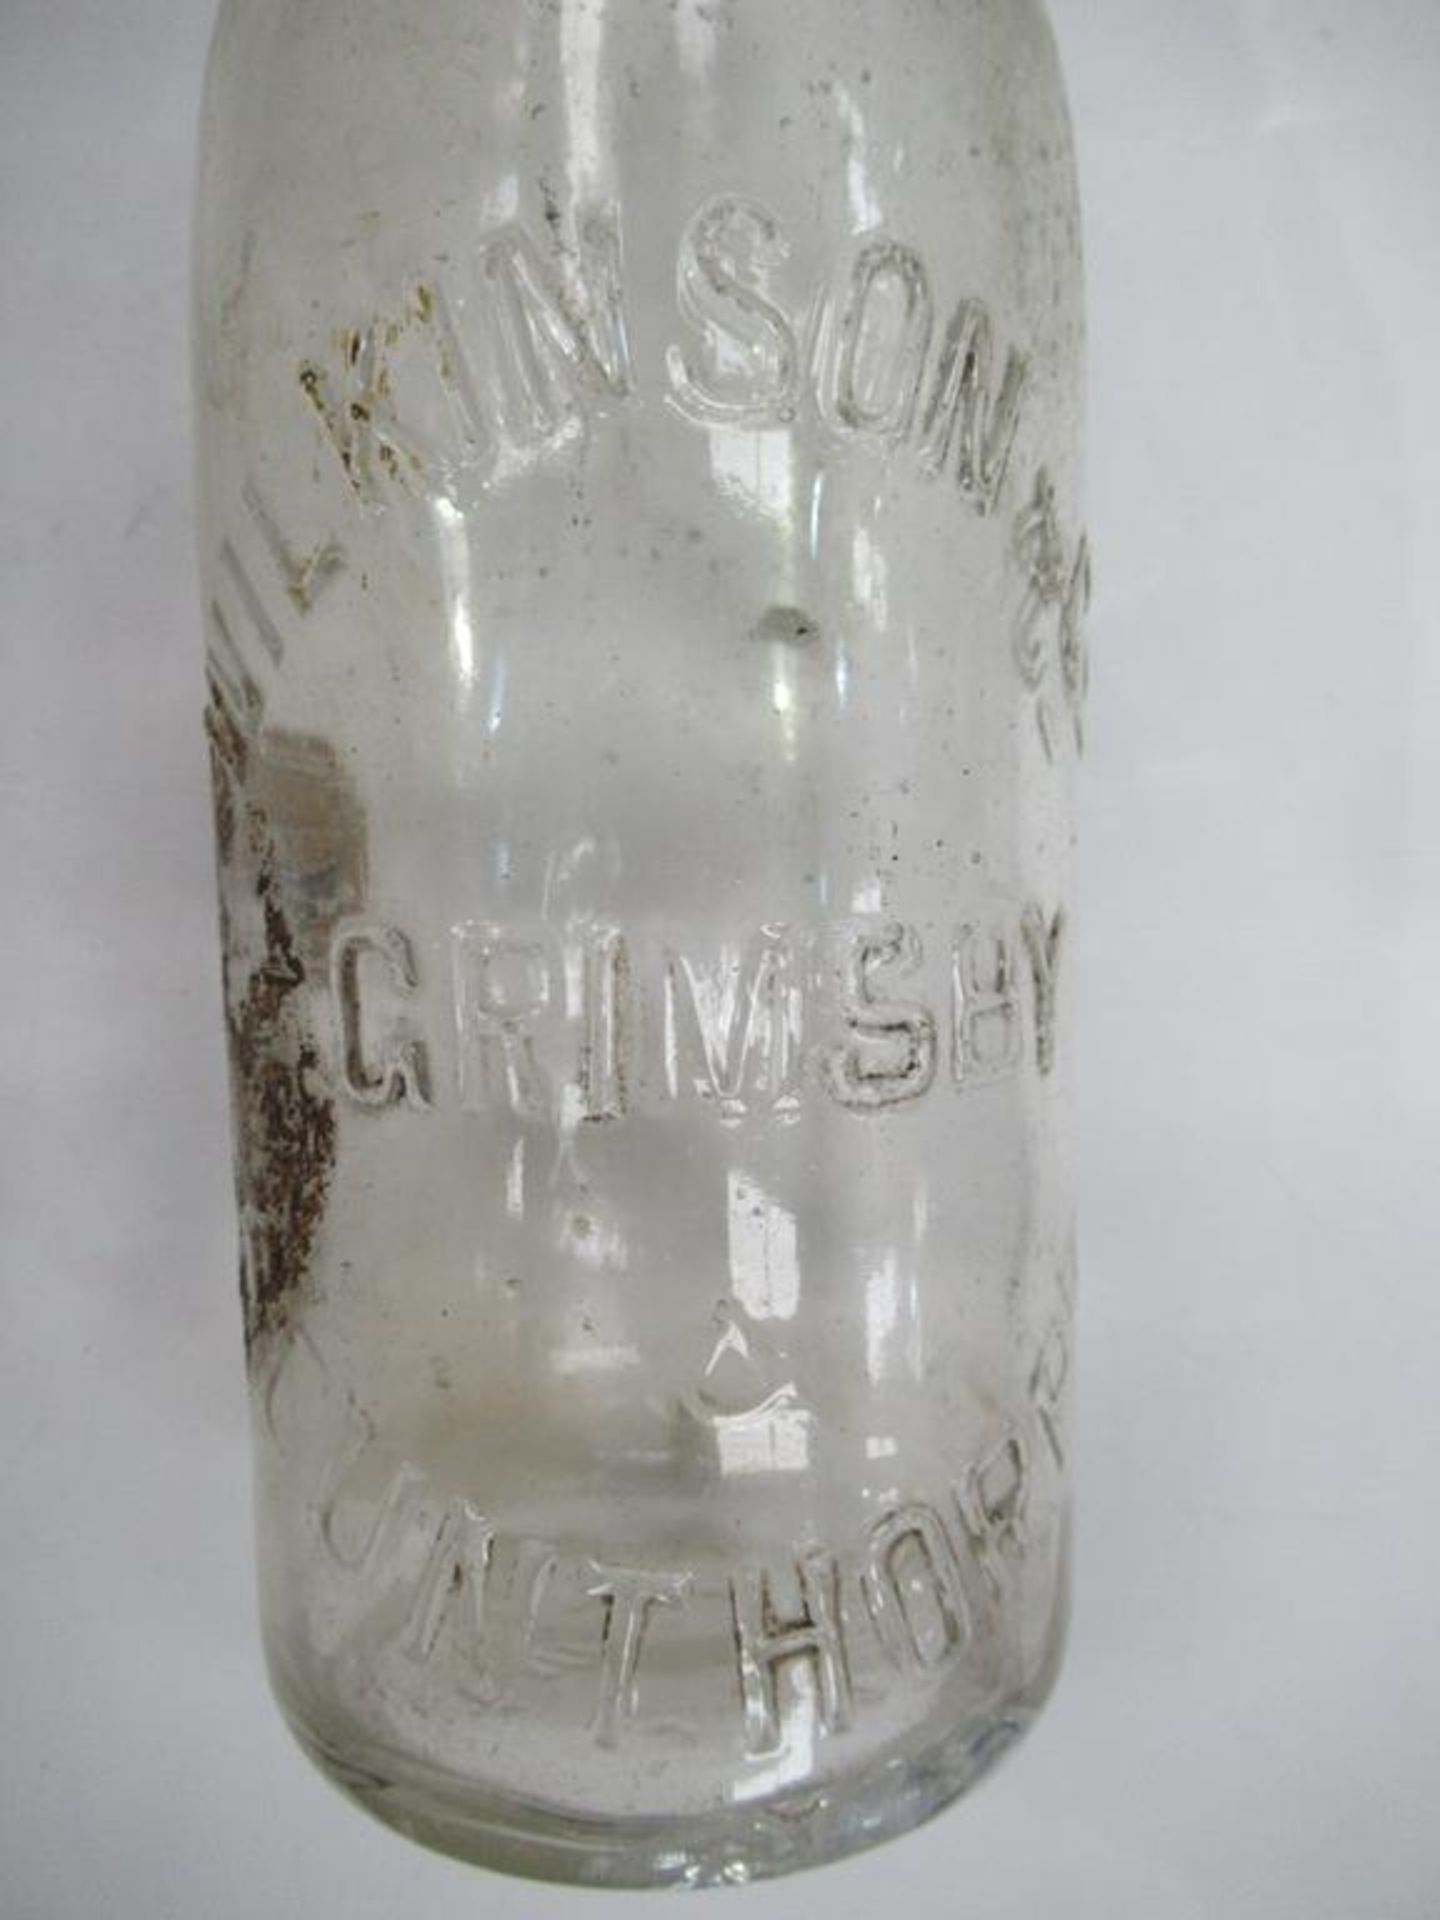 4x Grimsby (3x Scunthorpe) Wilkinsons & Co. bottles - Image 13 of 14